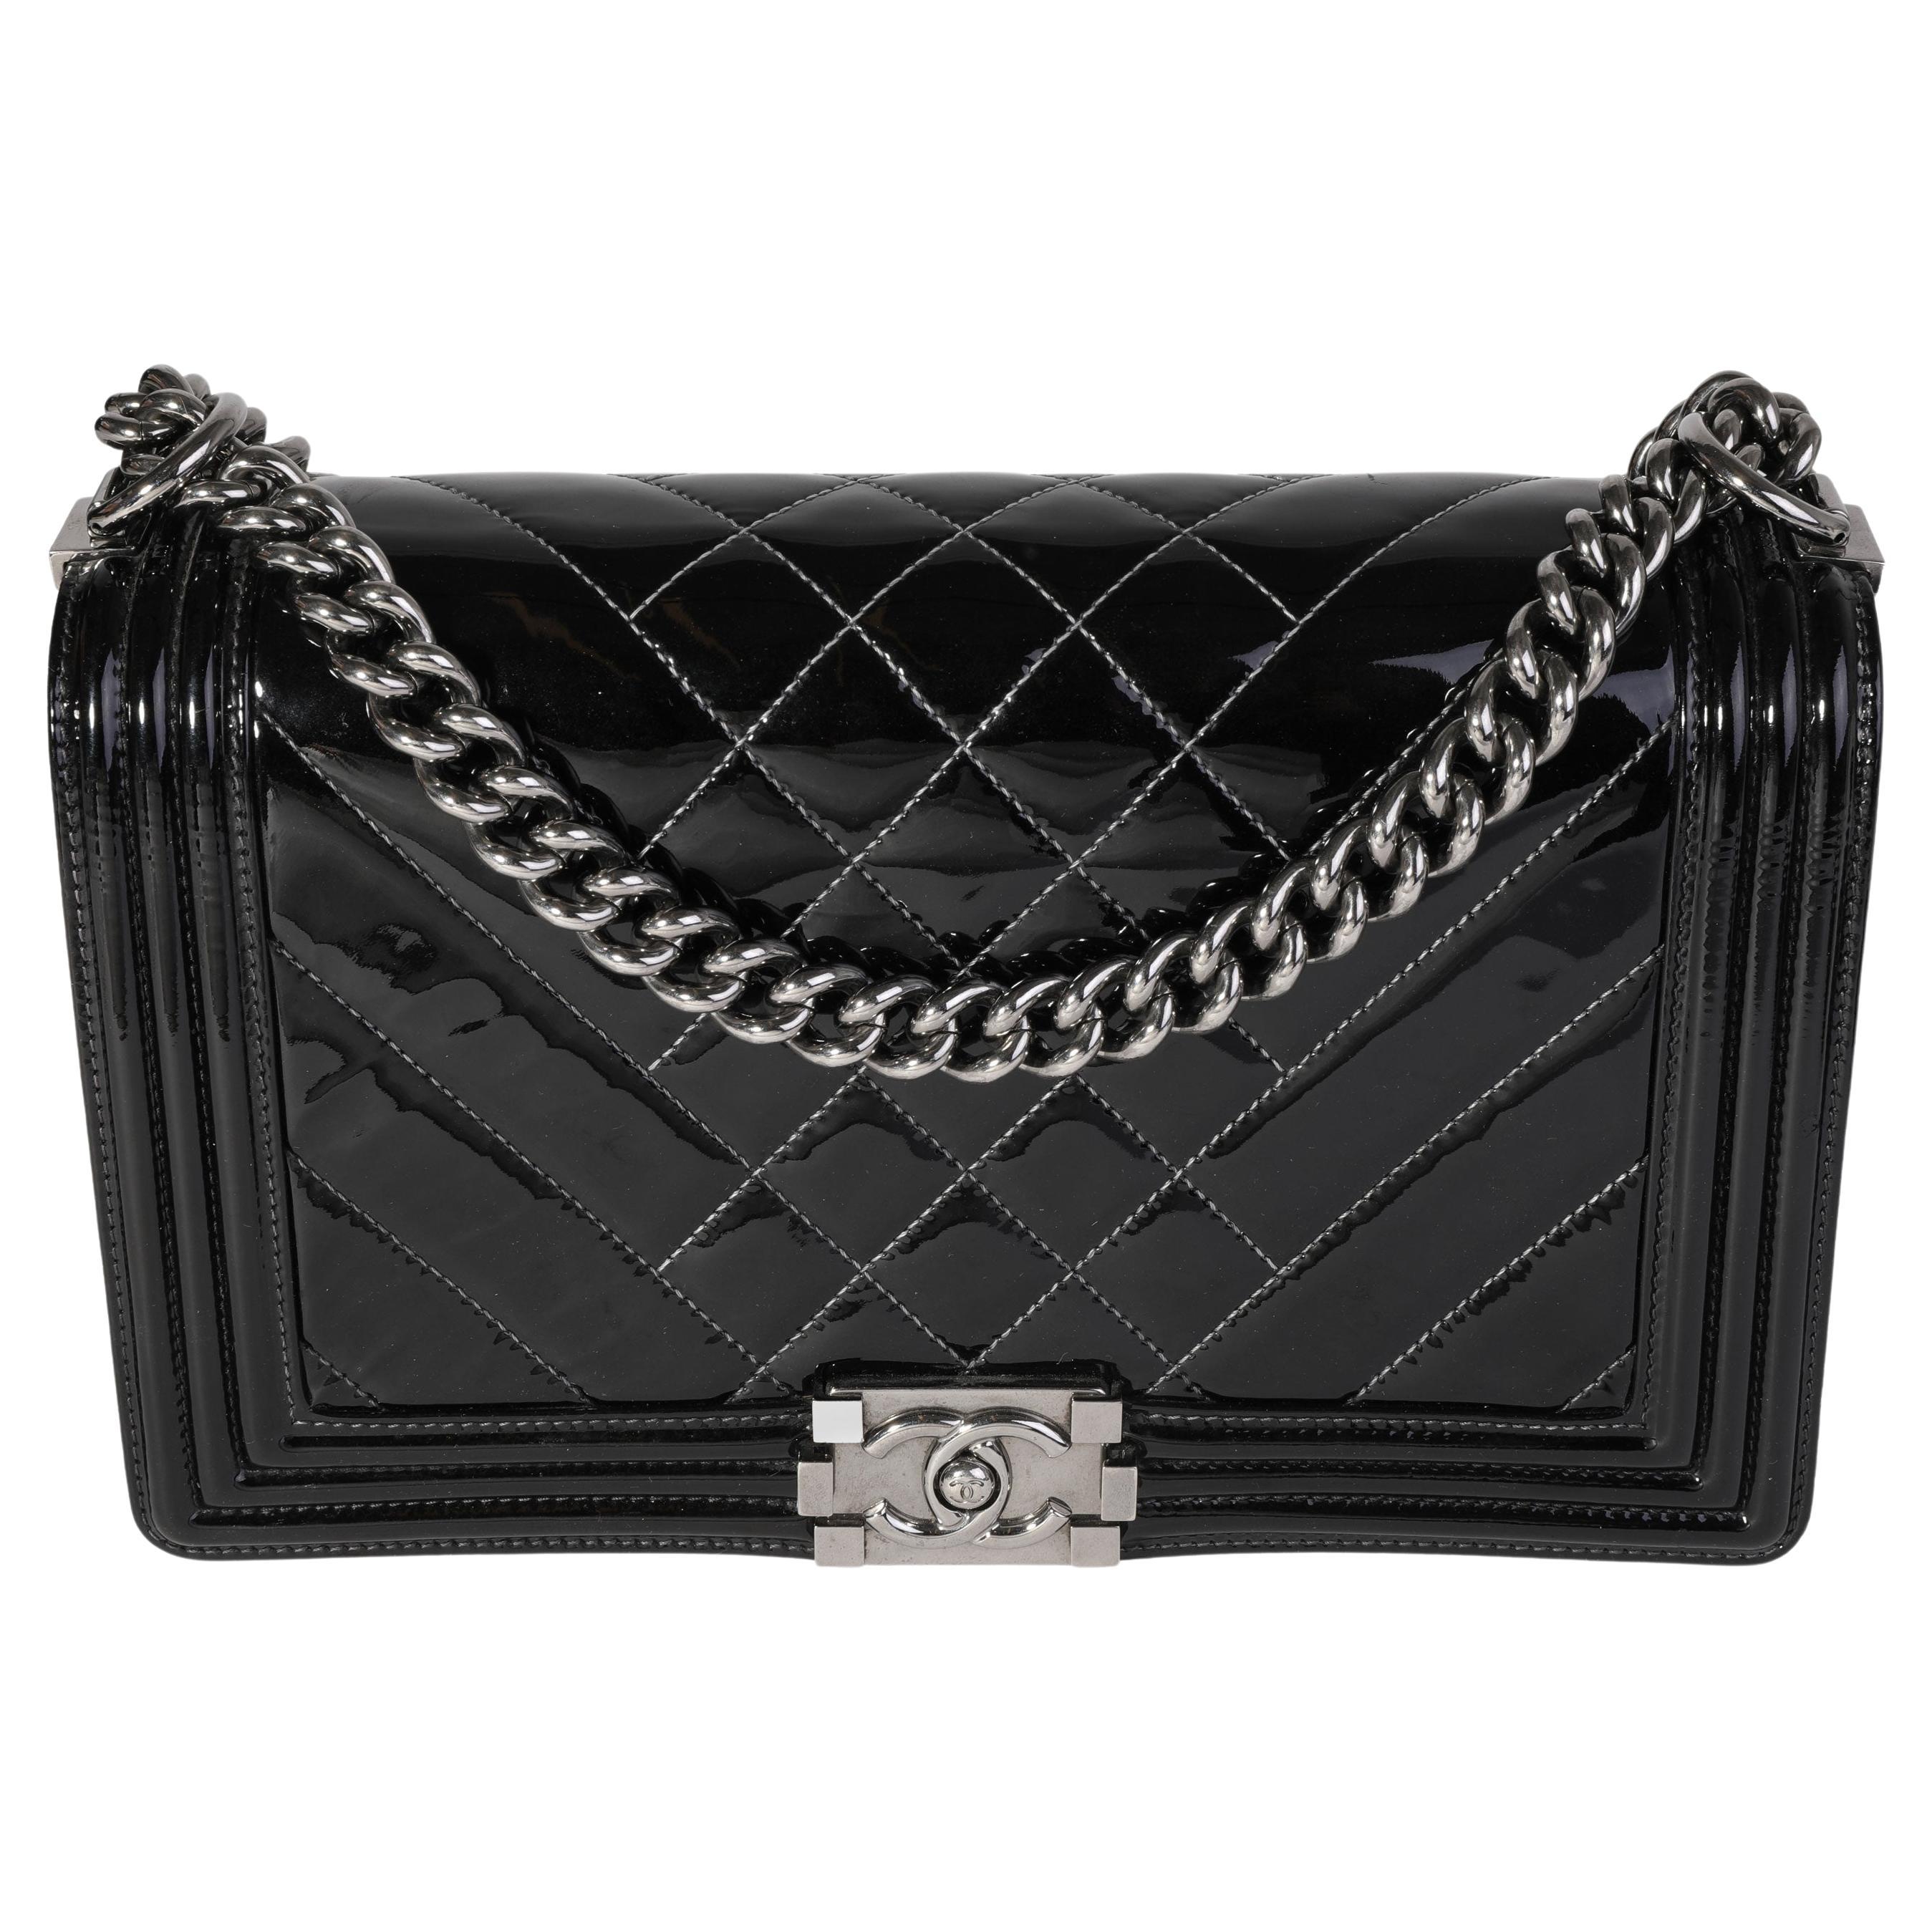 Chanel Black Quilted Patent Leather New Medium Boy Bag